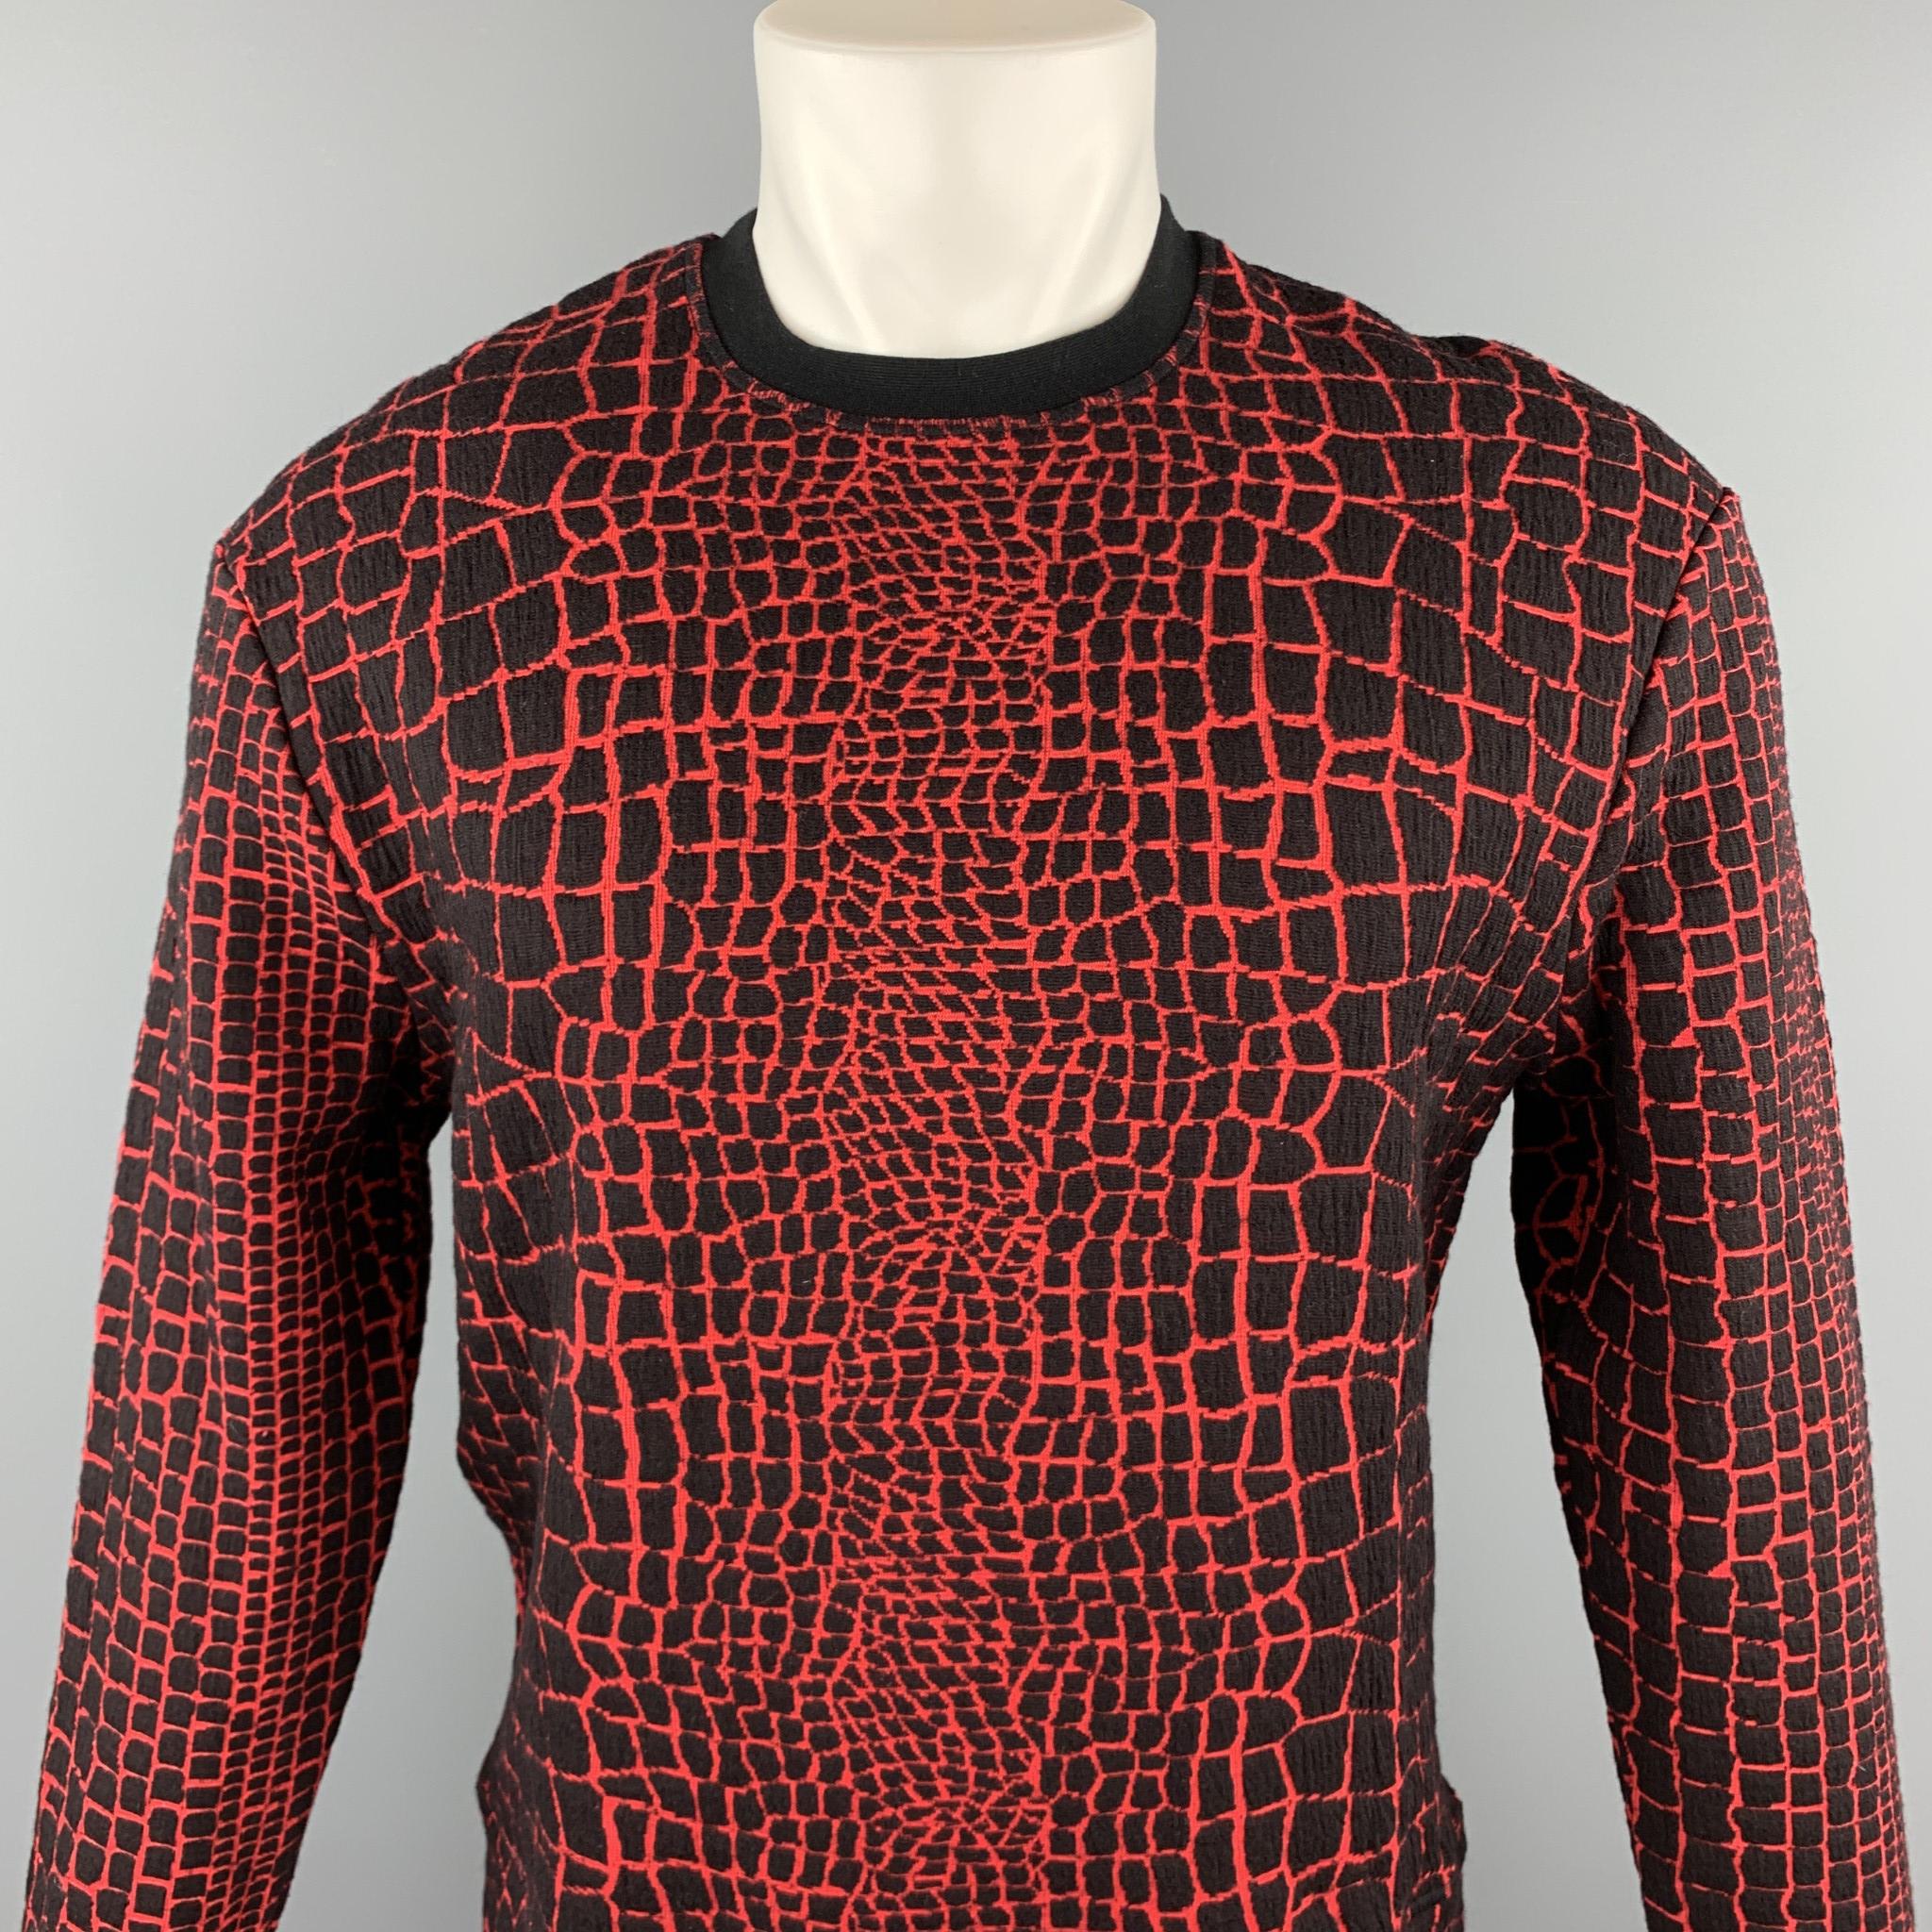 KENZO sweatshirt comes in a black & red alligator print cotton blend featuring a crew-neck. Made in Portugal.

New With Tags.
Marked: M

Measurements:

Shoulder: 20 in. 
Chest: 42 in. 
Sleeve: 22.5 in. 
Length: 23.5 in.